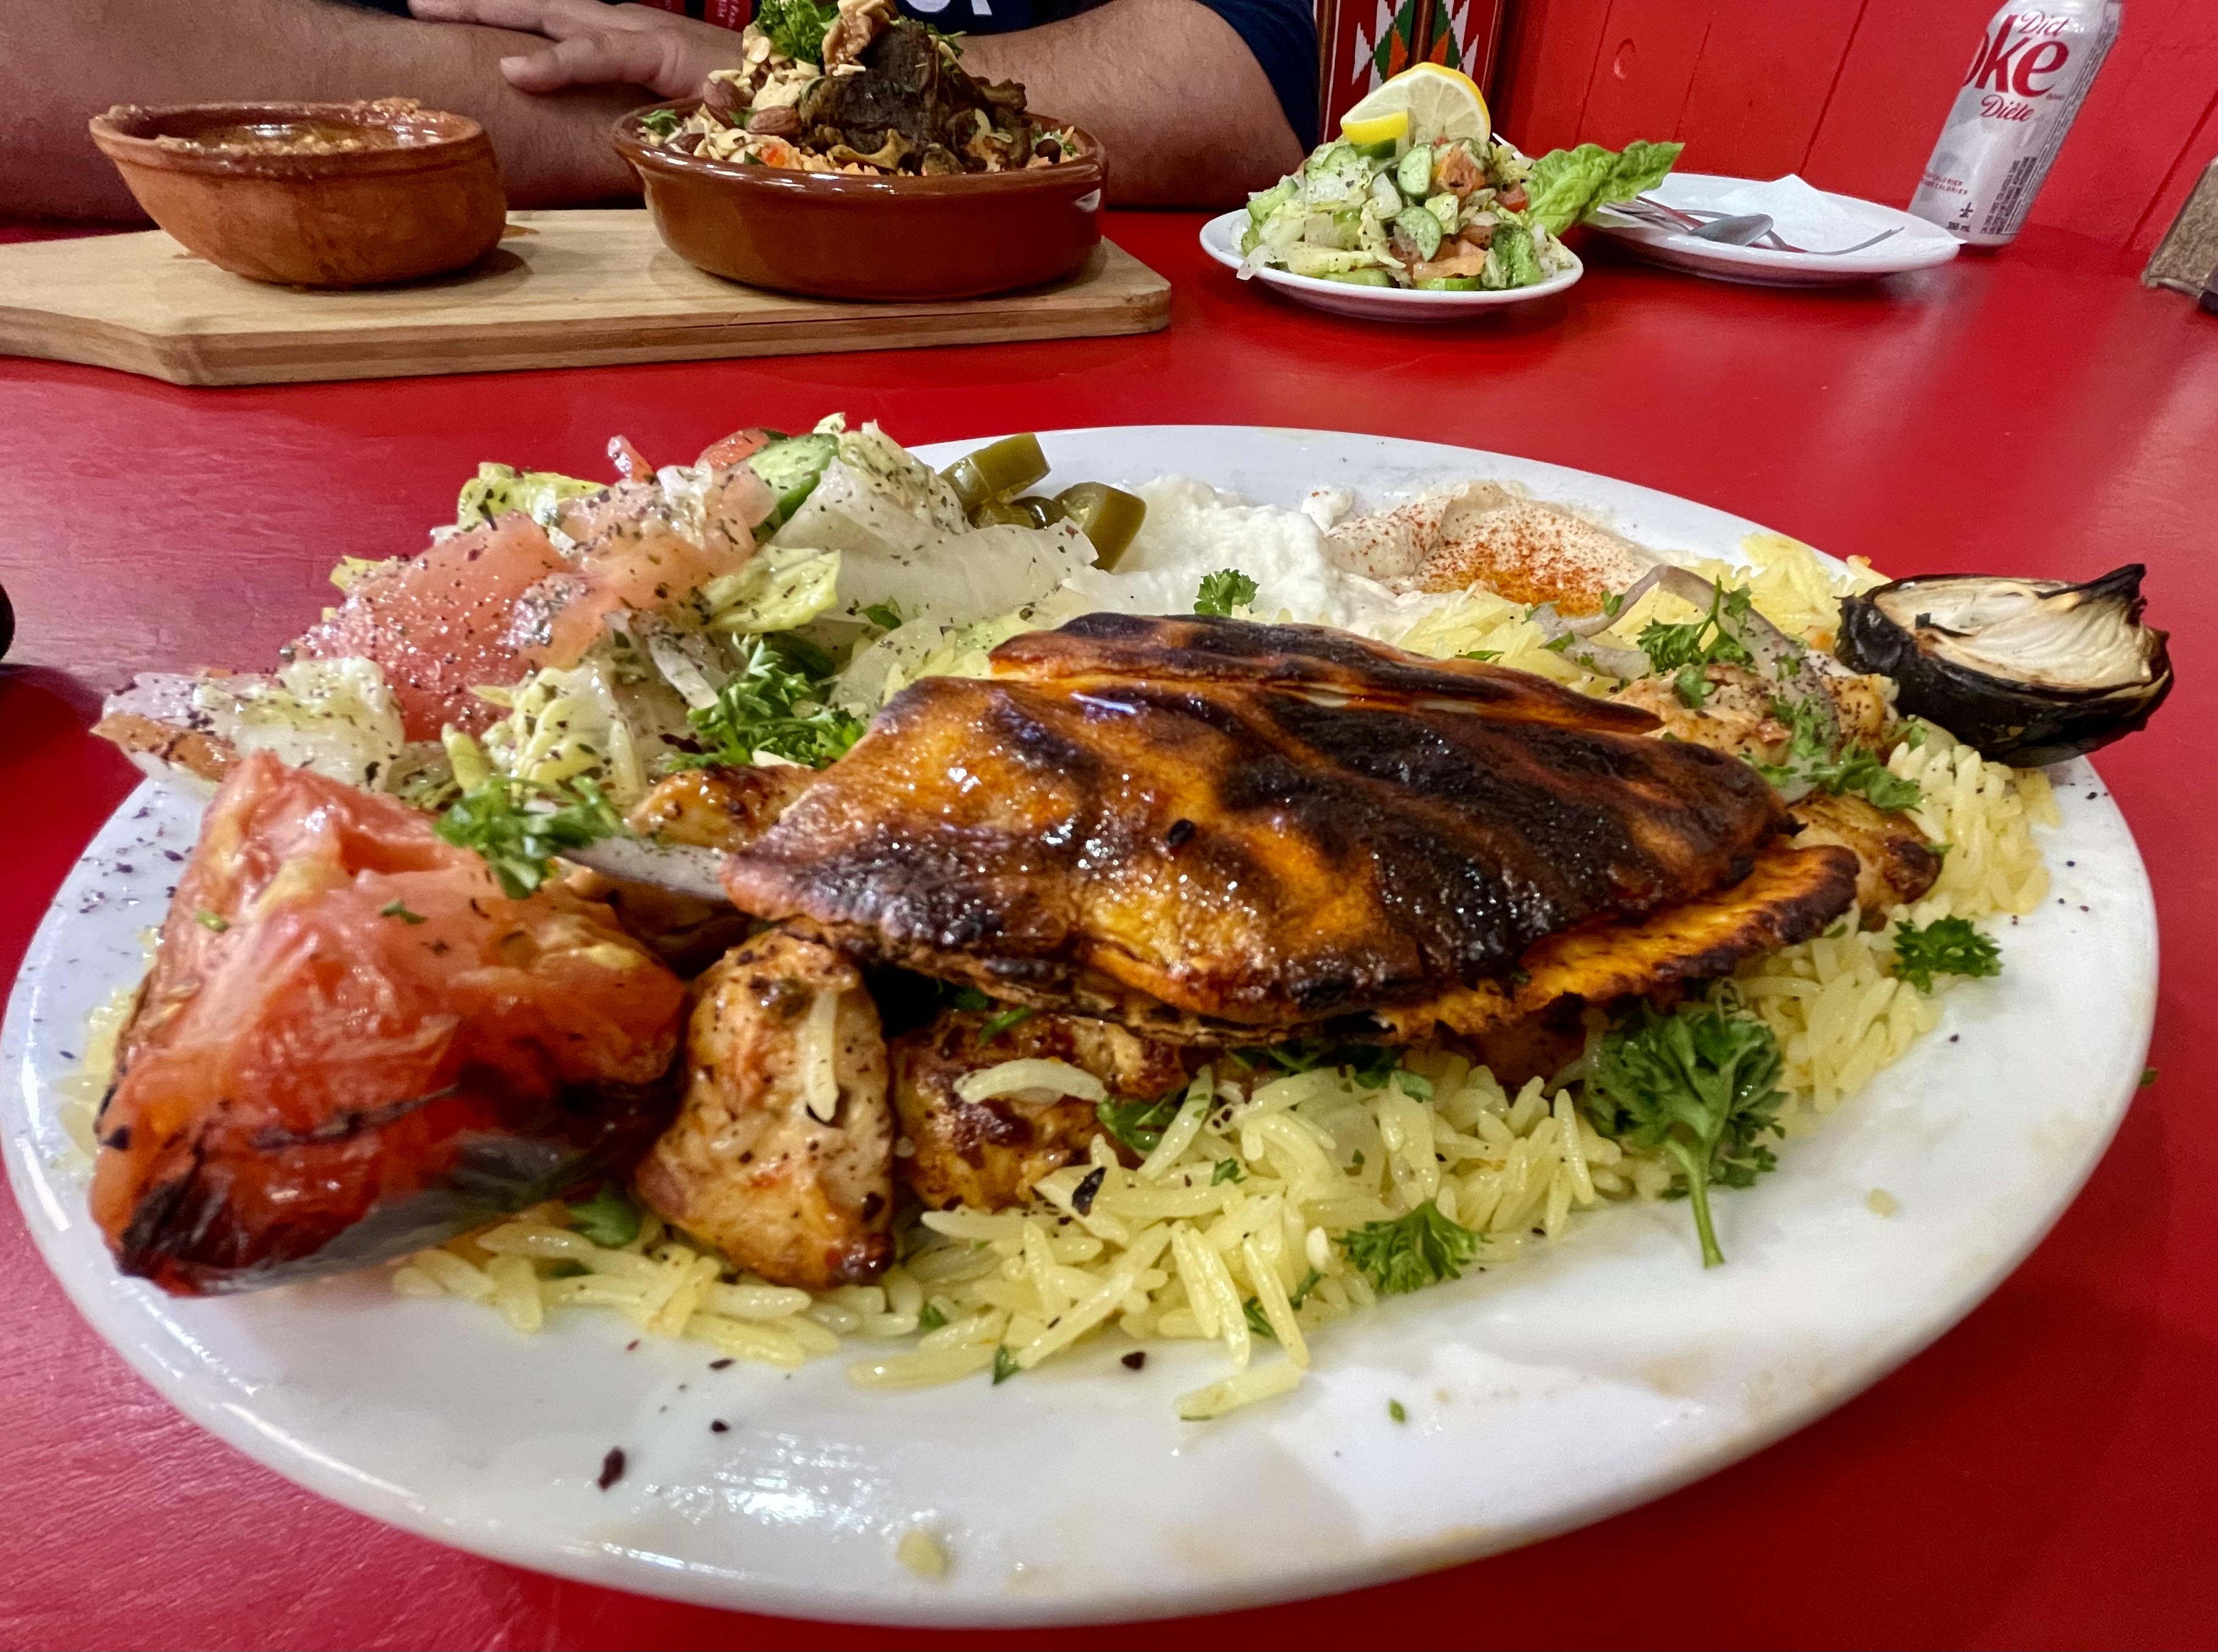 Service was great at Alhalabi and the portions were quite generous